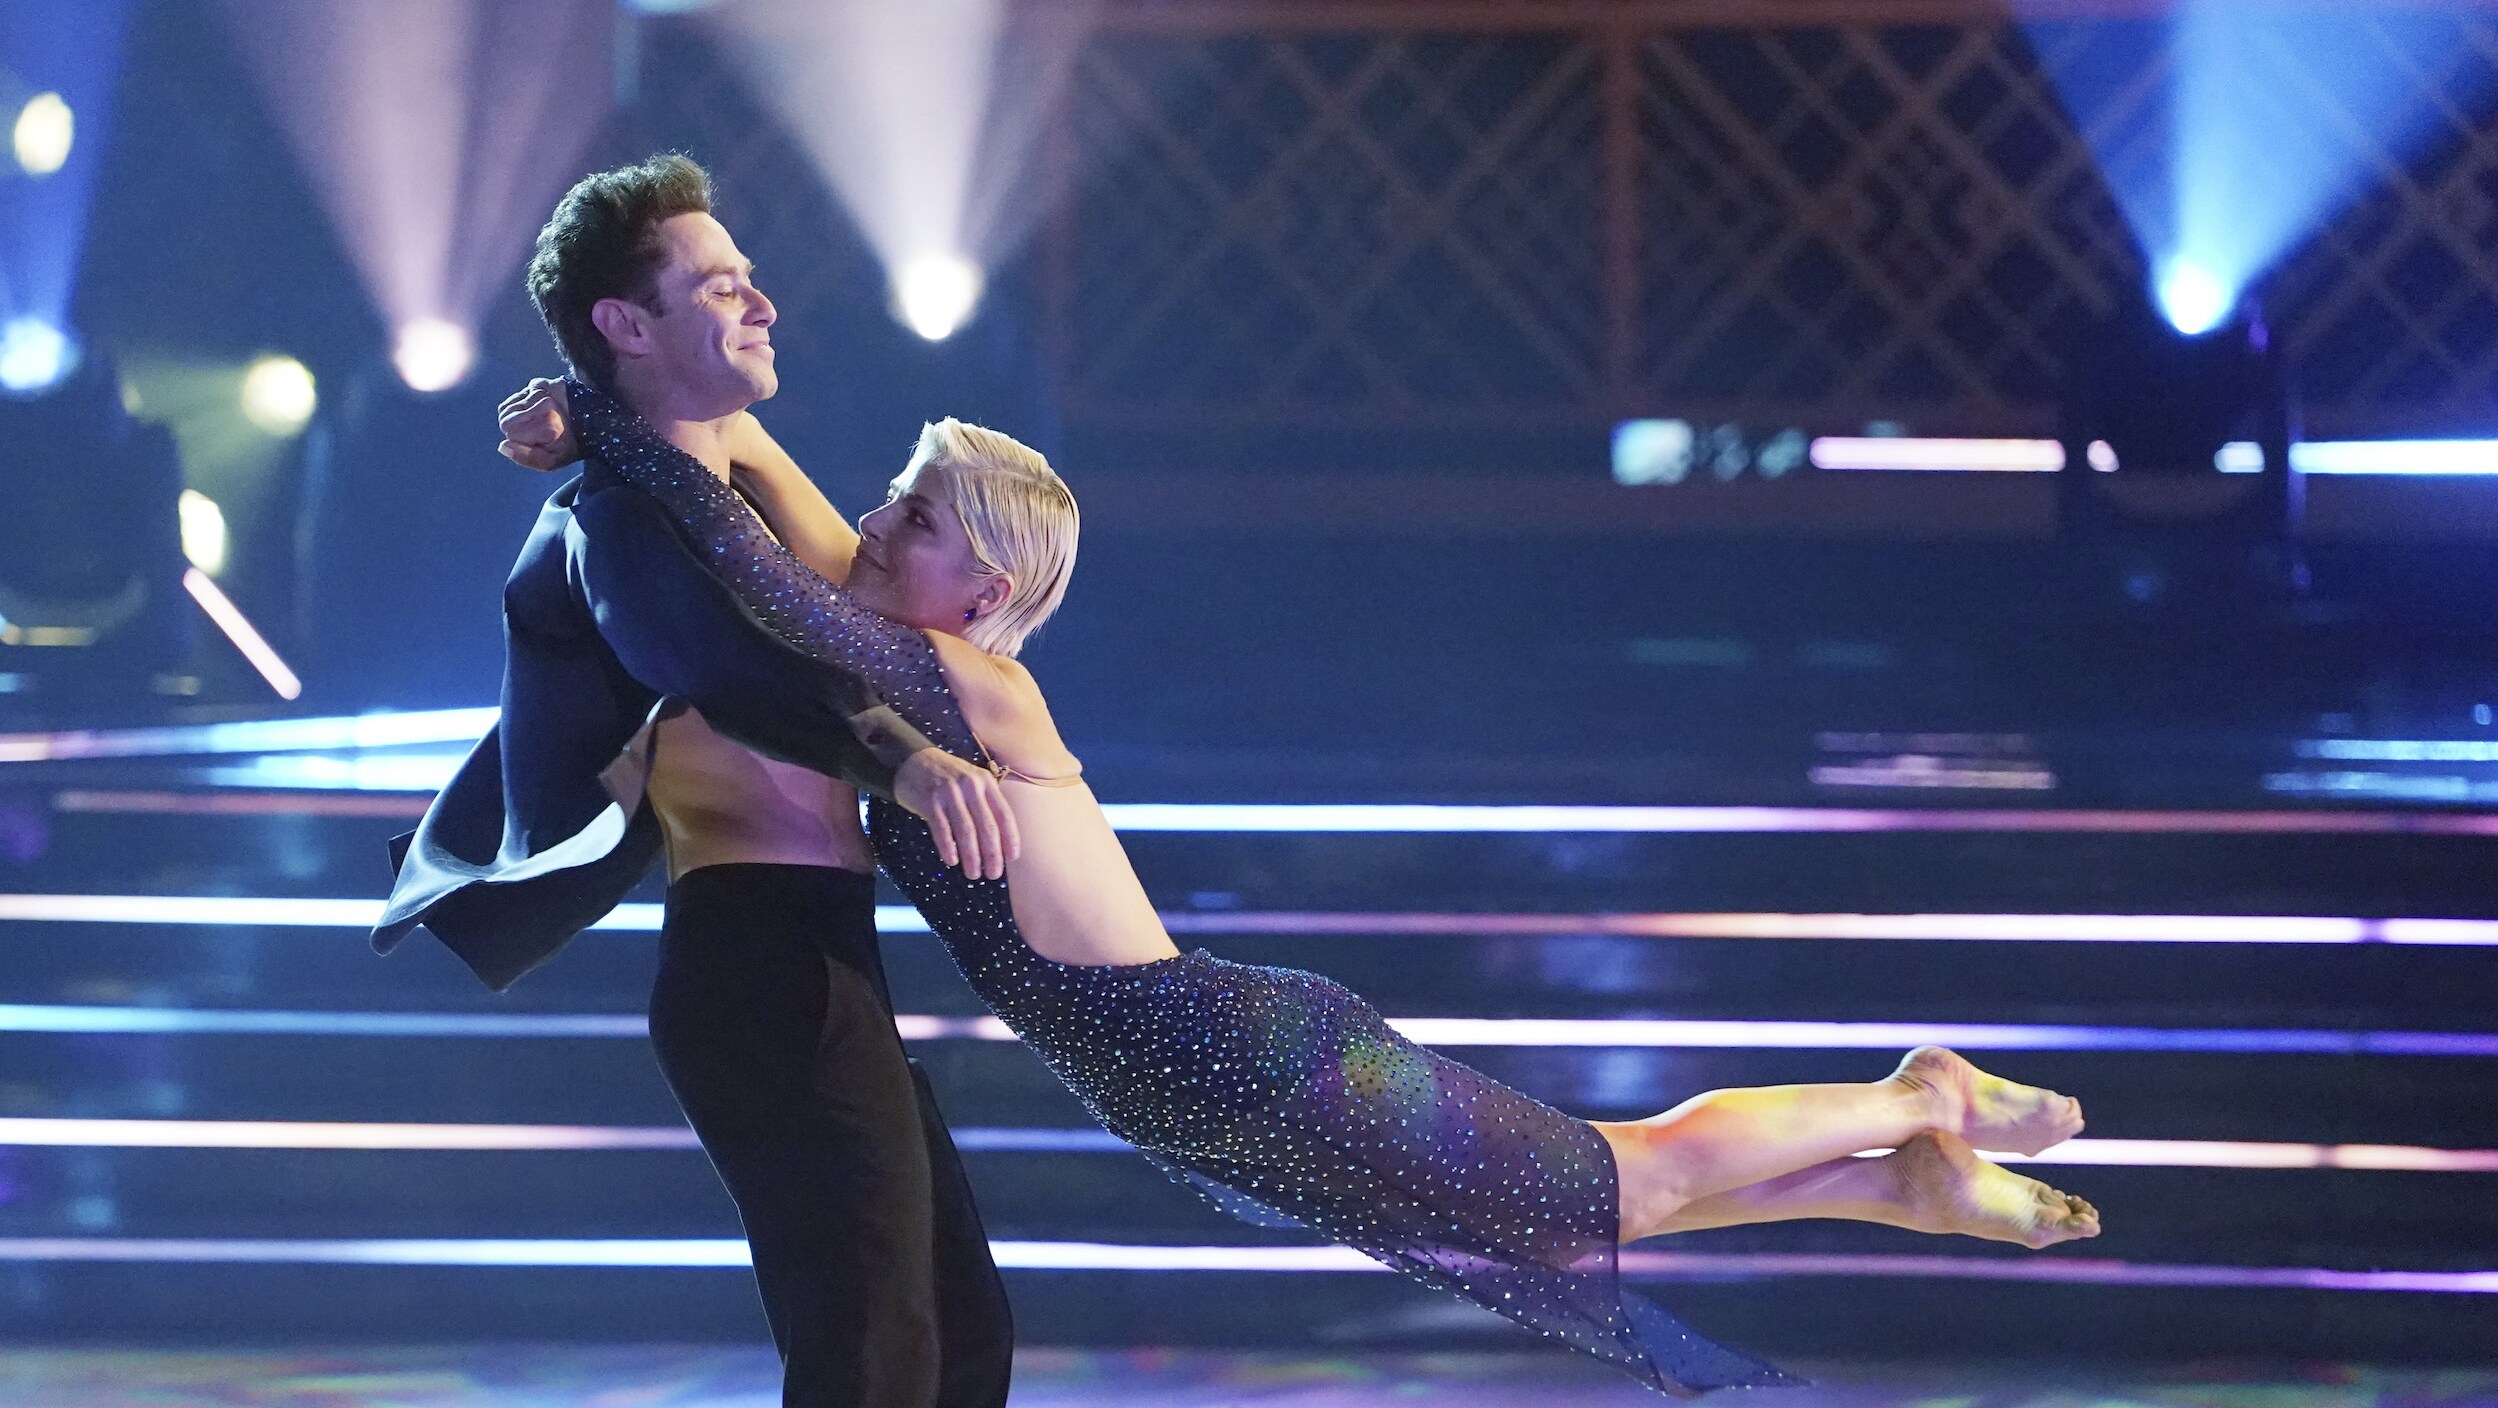 DANCING WITH THE STARS - “Finale” – The four finalists perform their final two routines in hopes of winning the mirrorball trophy. Each couple will perform a redemption dance and an unforgettable freestyle routine. A new episode of “Dancing with the Stars” will stream live MONDAY, NOV. 21 (8:00pm ET / 5:00pm PT), on Disney+. (ABC/Eric McCandless) SASHA FARBER, SELMA BLAIR